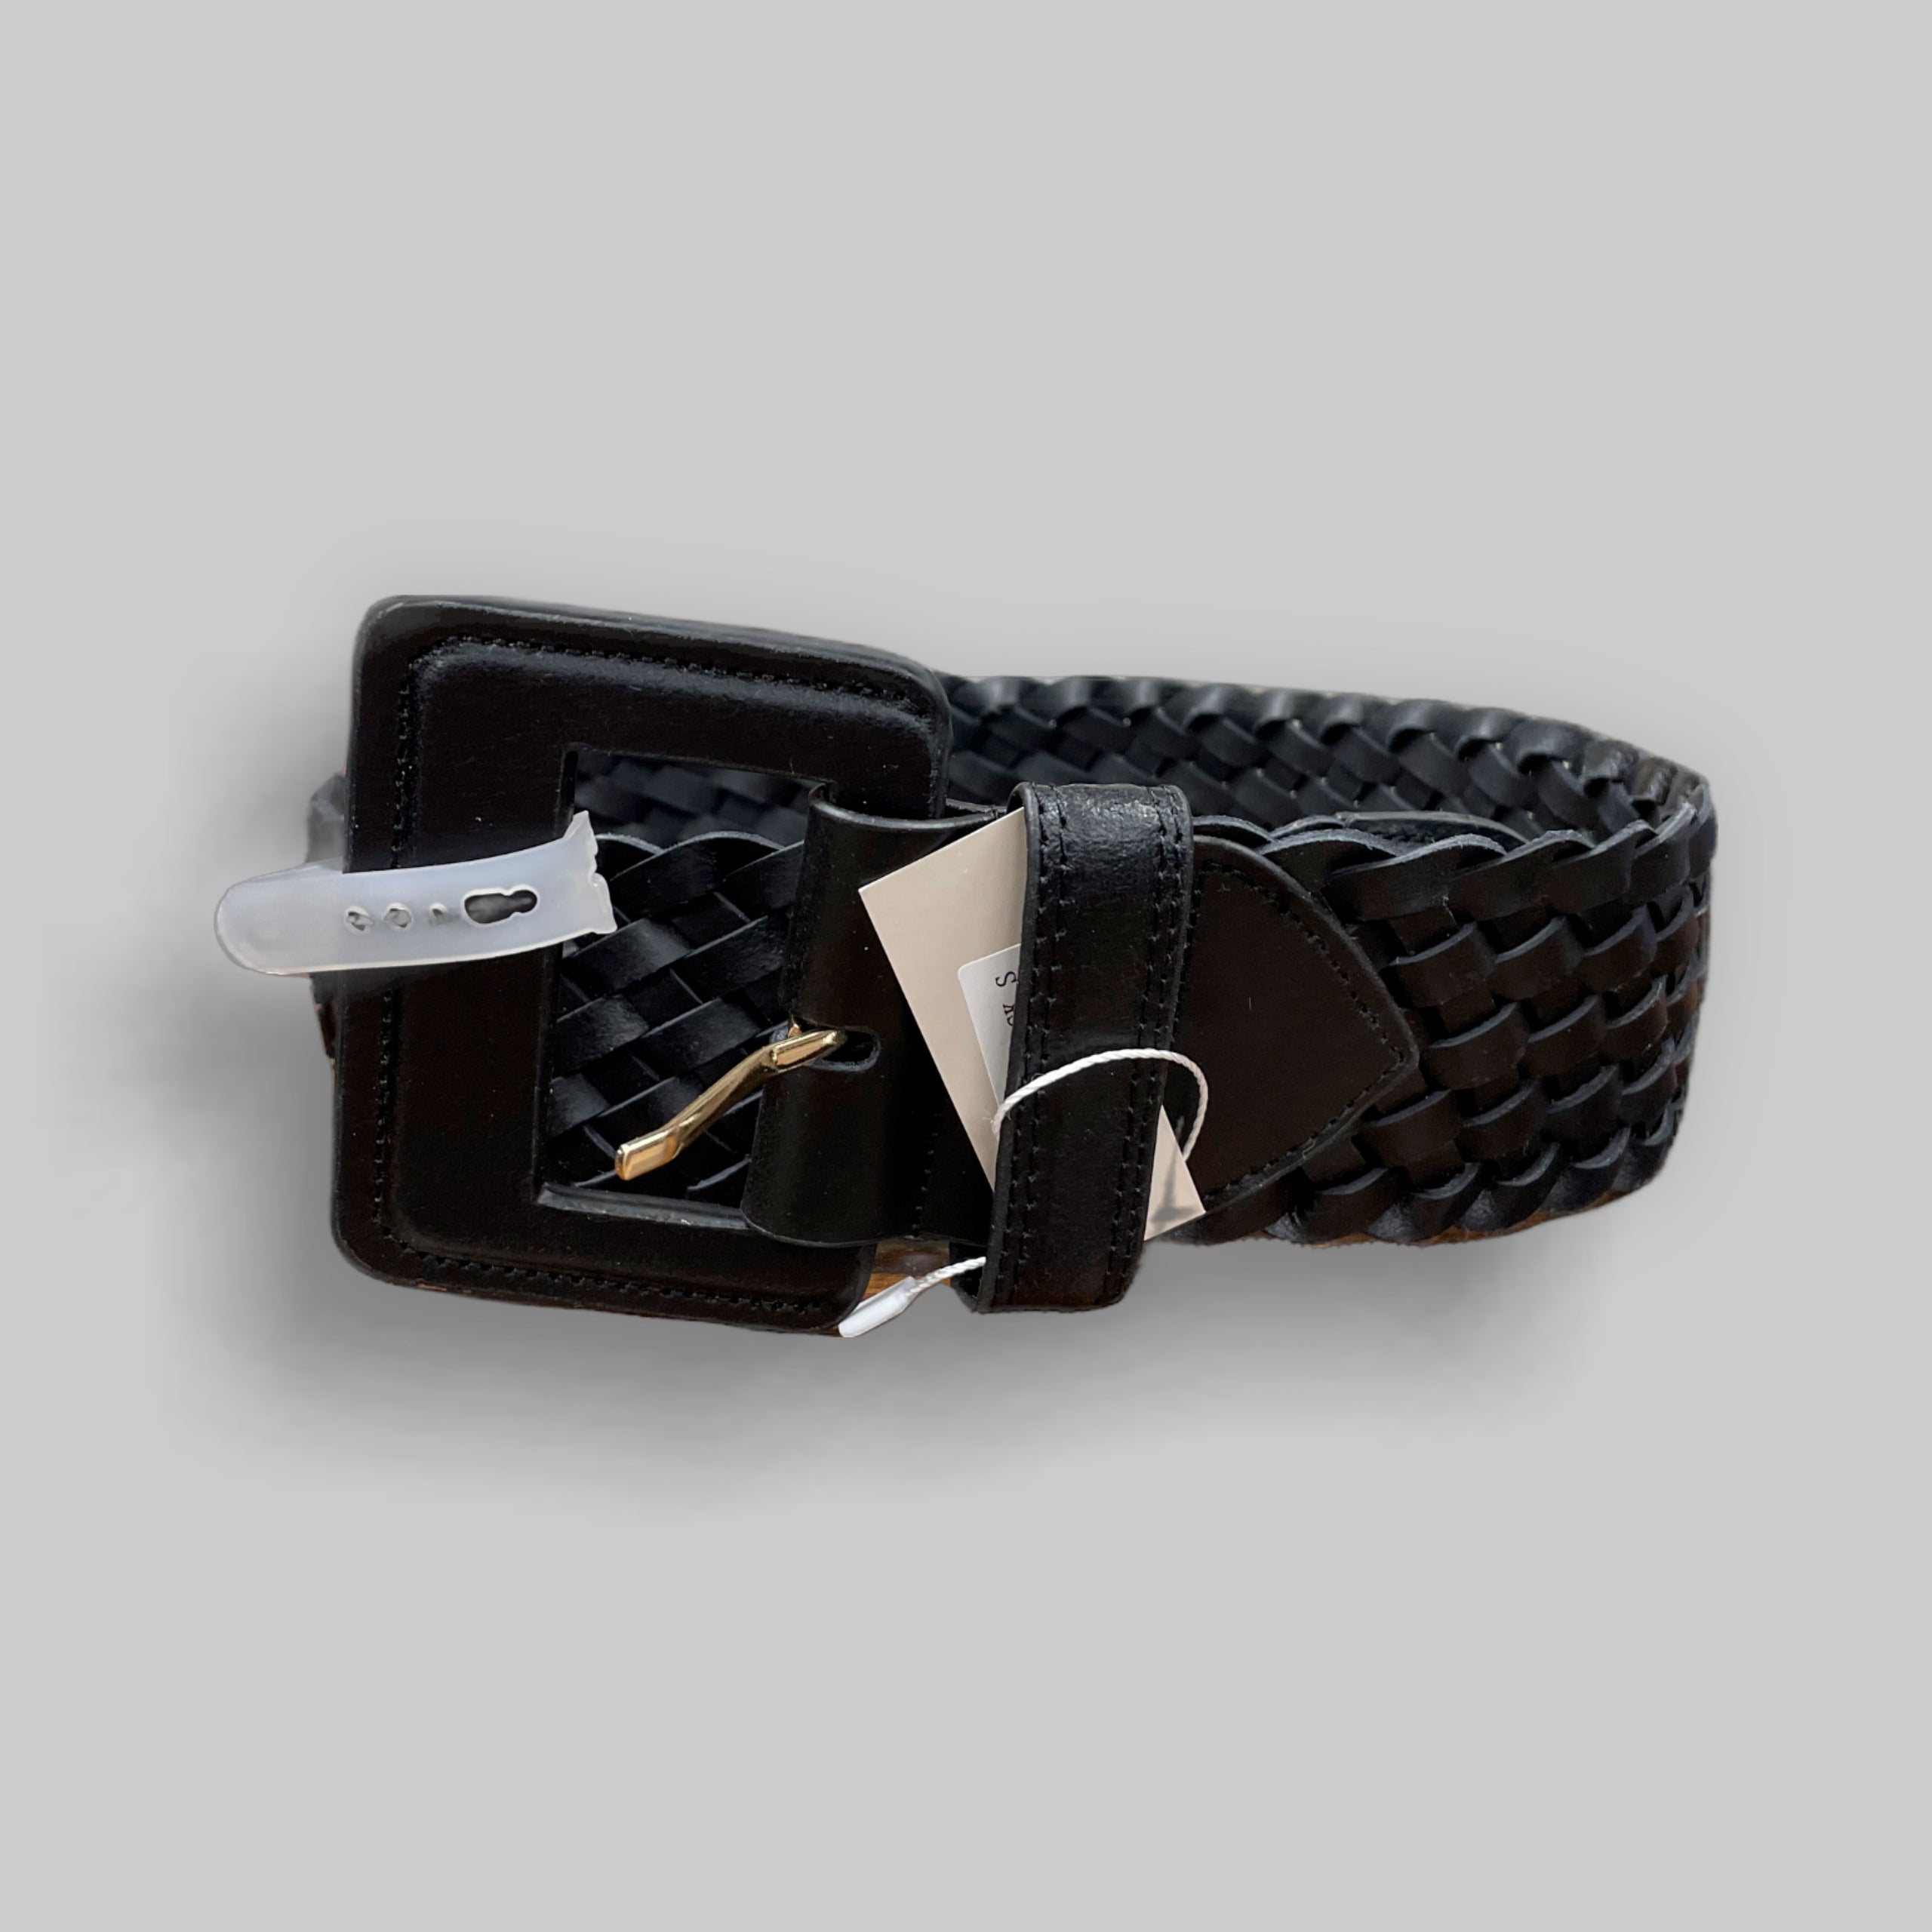 Wide Woven Braided Leather Belt Black